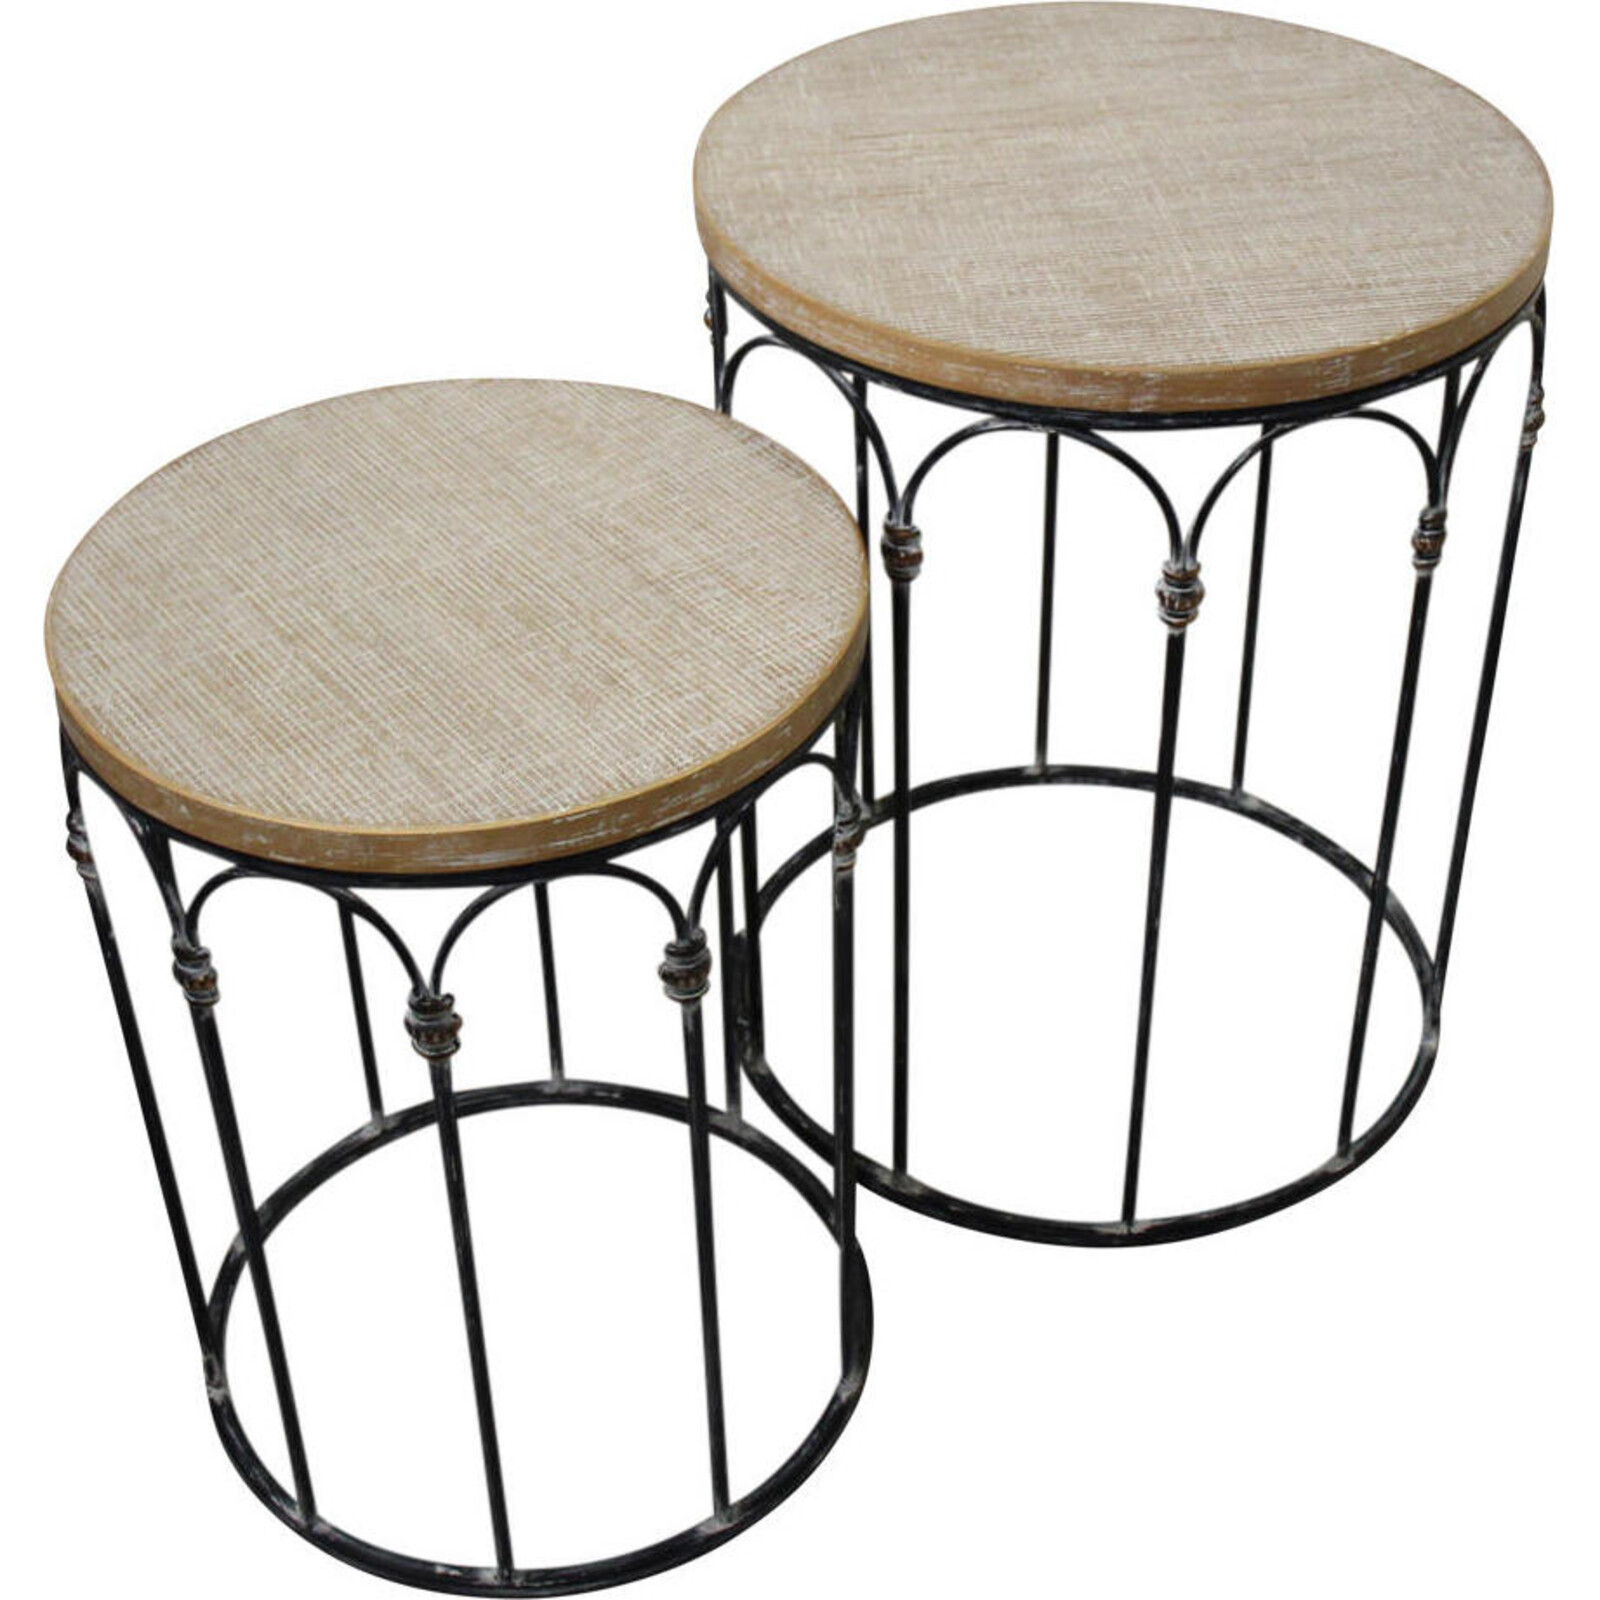 S/2 Tables Crosshatch